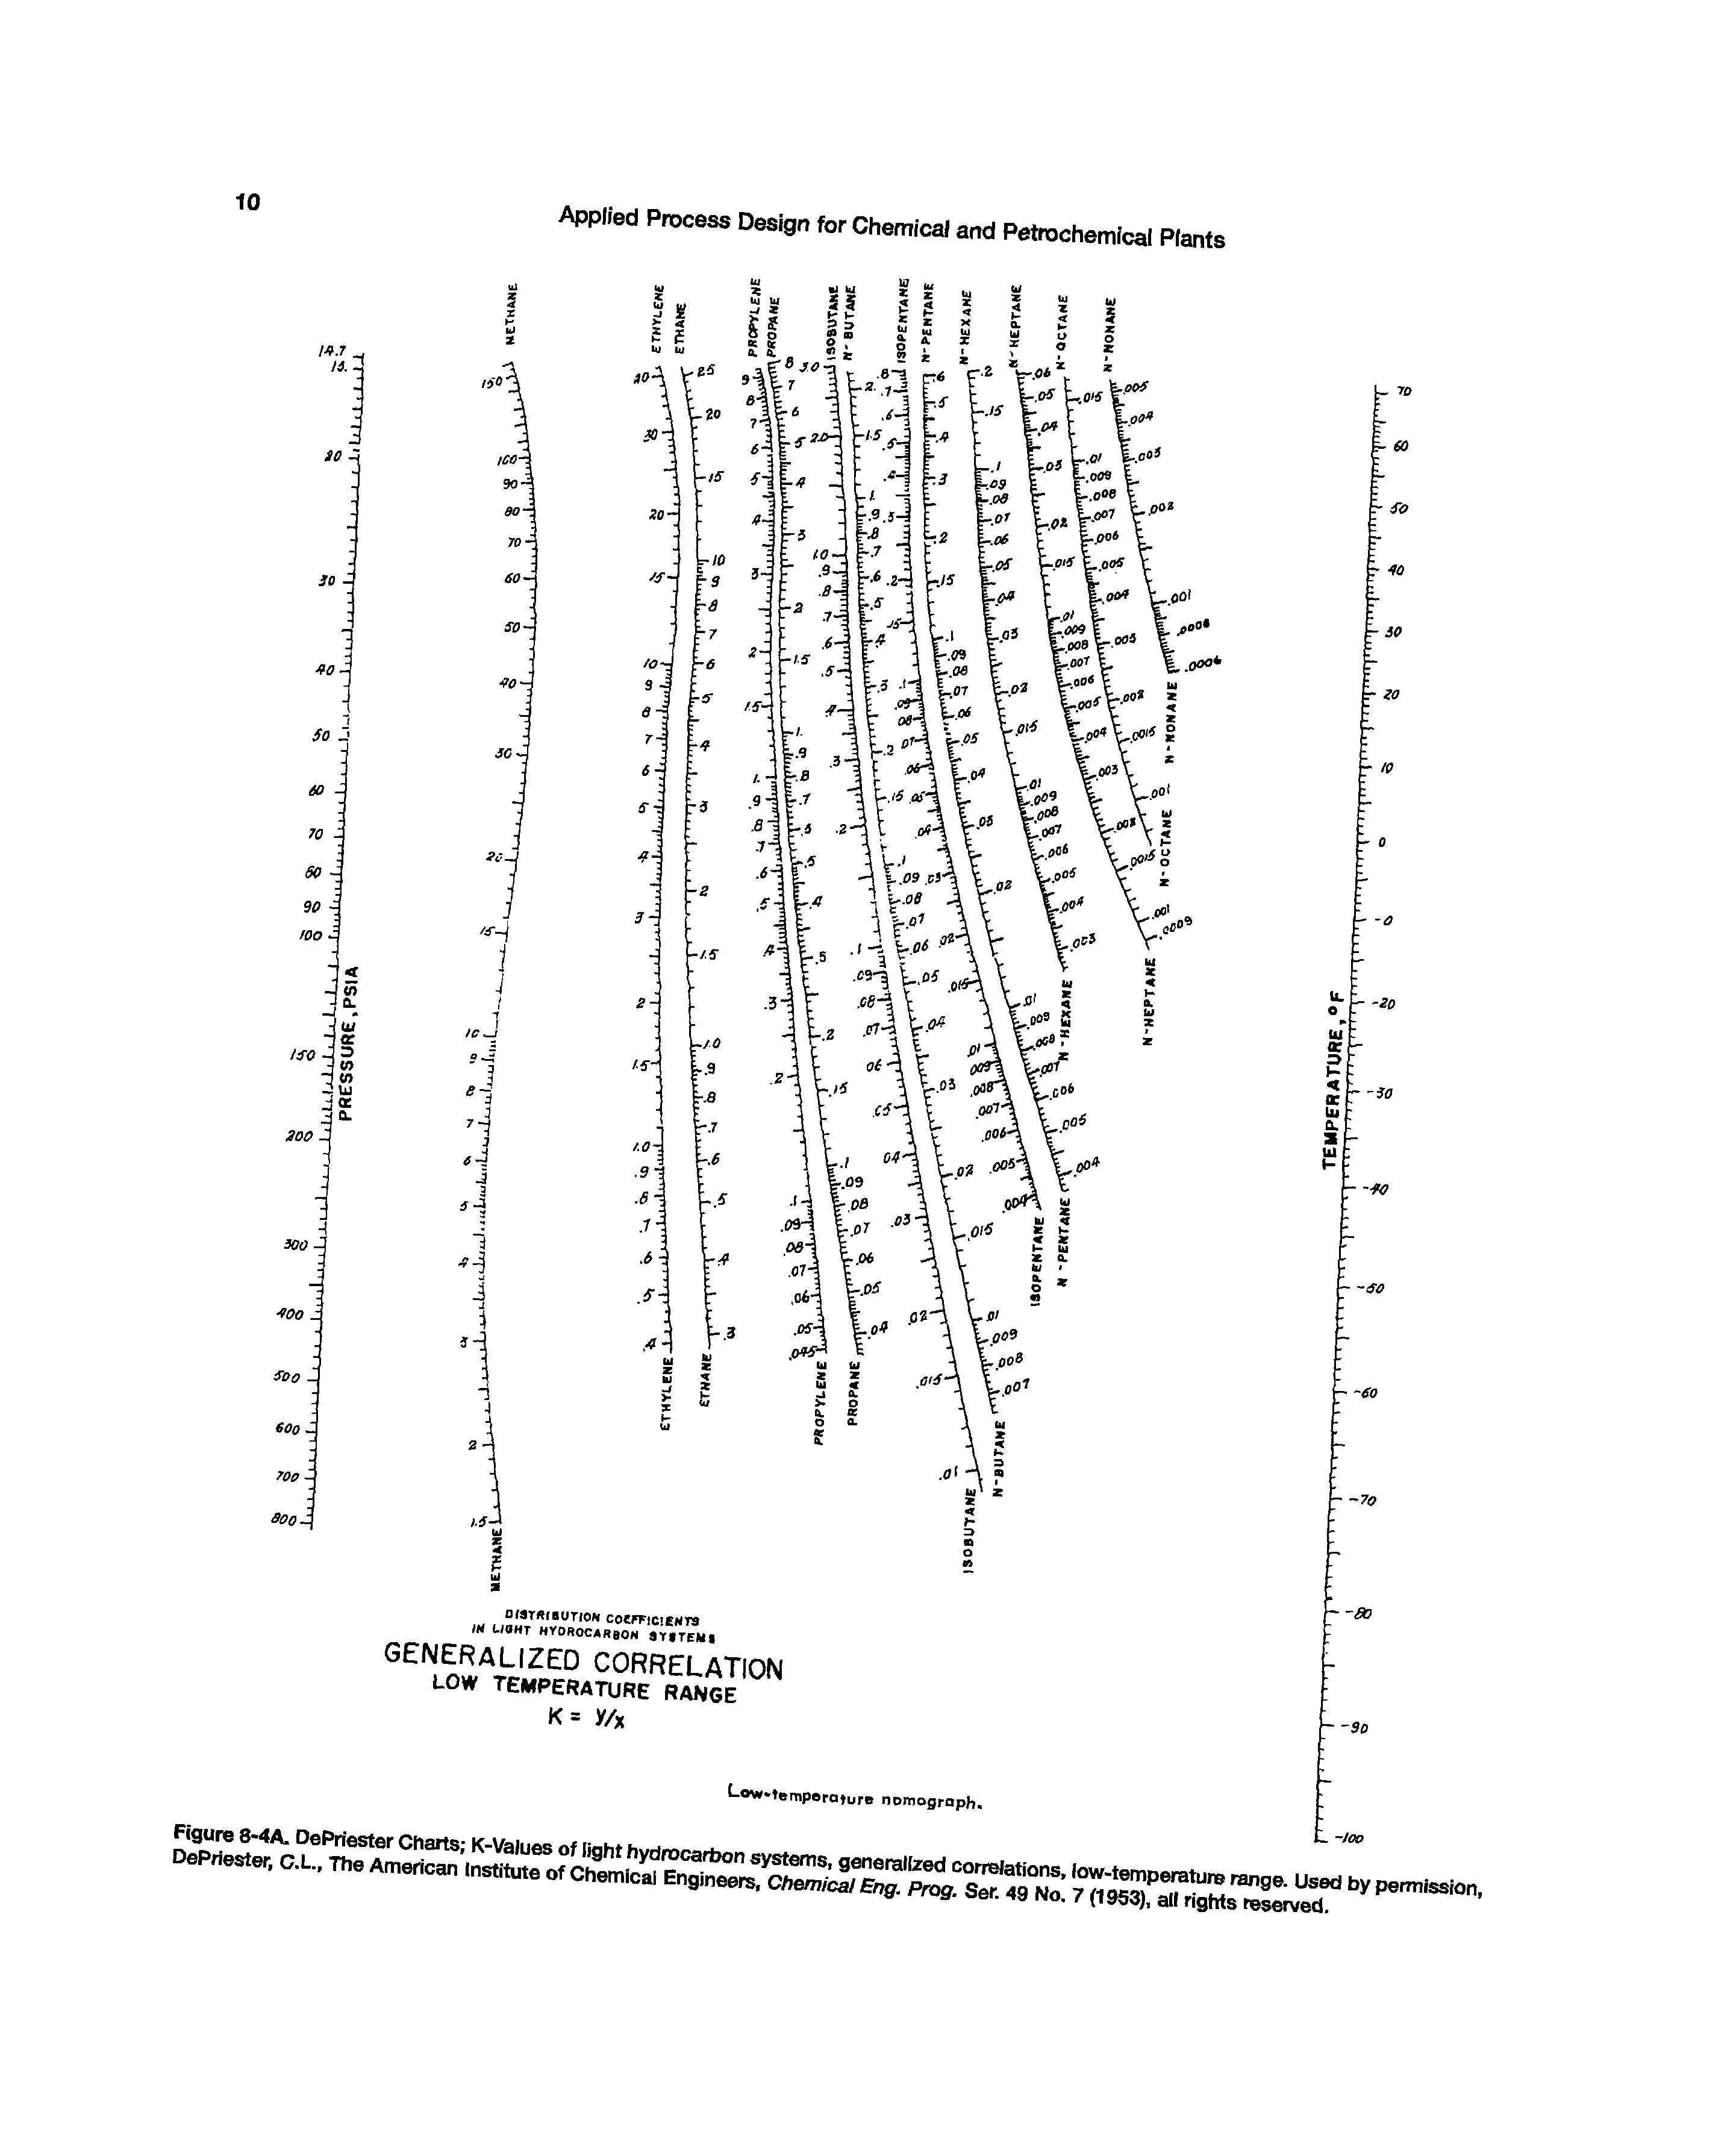 Figure 8 4A. DePriester Charts K-Values of light hydrocarbon systems, generalized oorreiations, low-temperature range. Used by permission DePnester, C.L., The American Institute of Chemical Engineers, Chemical Eng. Prog. Ser. 49 No. 7 (1953), ail rights reserved.